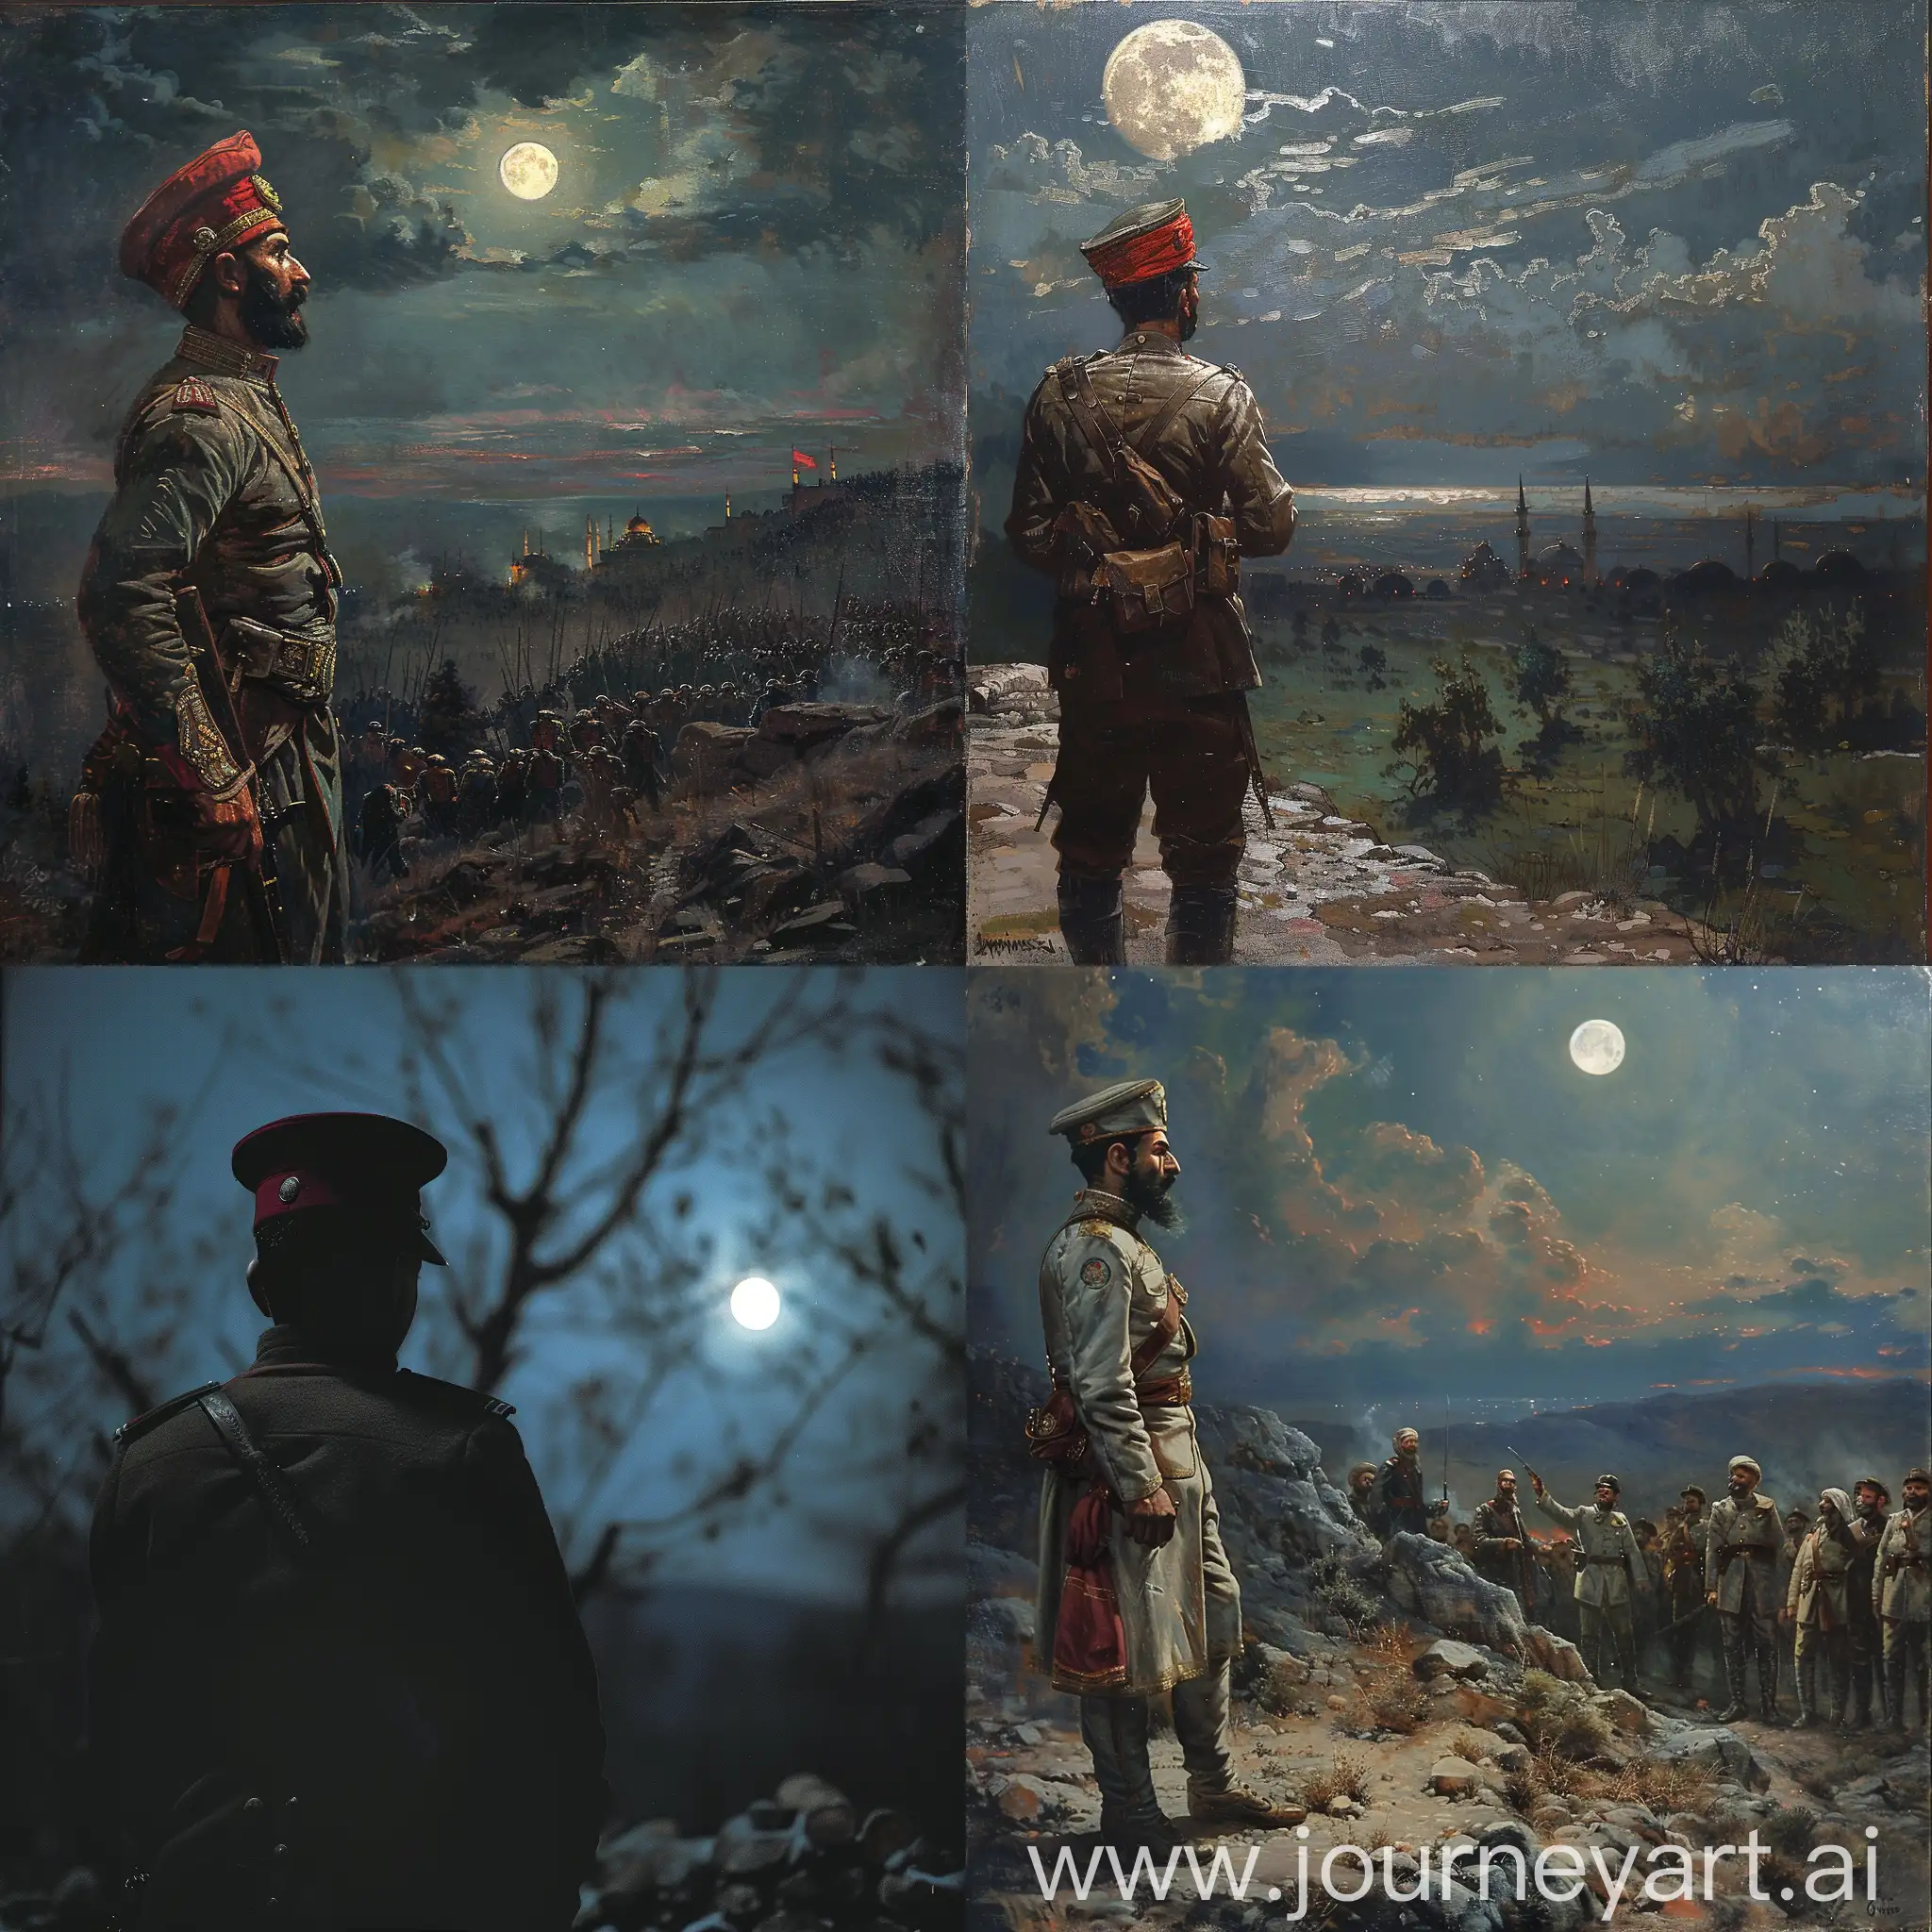 A Turkish officer looks at the bright moonlight in the sky during the War of Independence.